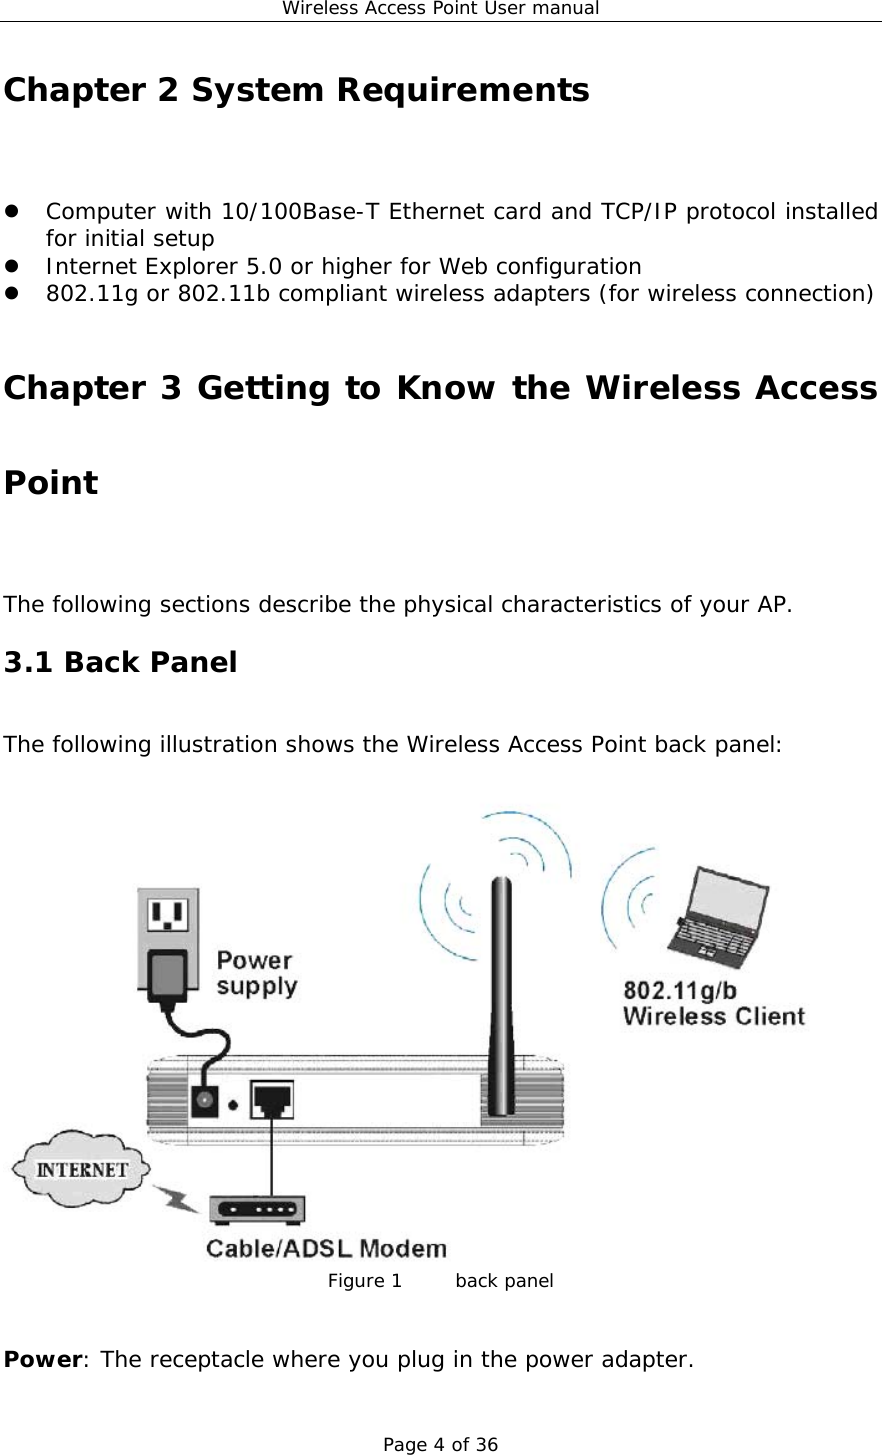 Wireless Access Point User manual Page 4 of 36 Chapter 2 System Requirements z Computer with 10/100Base-T Ethernet card and TCP/IP protocol installed for initial setup z Internet Explorer 5.0 or higher for Web configuration z 802.11g or 802.11b compliant wireless adapters (for wireless connection)  Chapter 3 Getting to Know the Wireless Access Point The following sections describe the physical characteristics of your AP. 3.1 Back Panel The following illustration shows the Wireless Access Point back panel:   Figure 1    back panel   Power: The receptacle where you plug in the power adapter.  